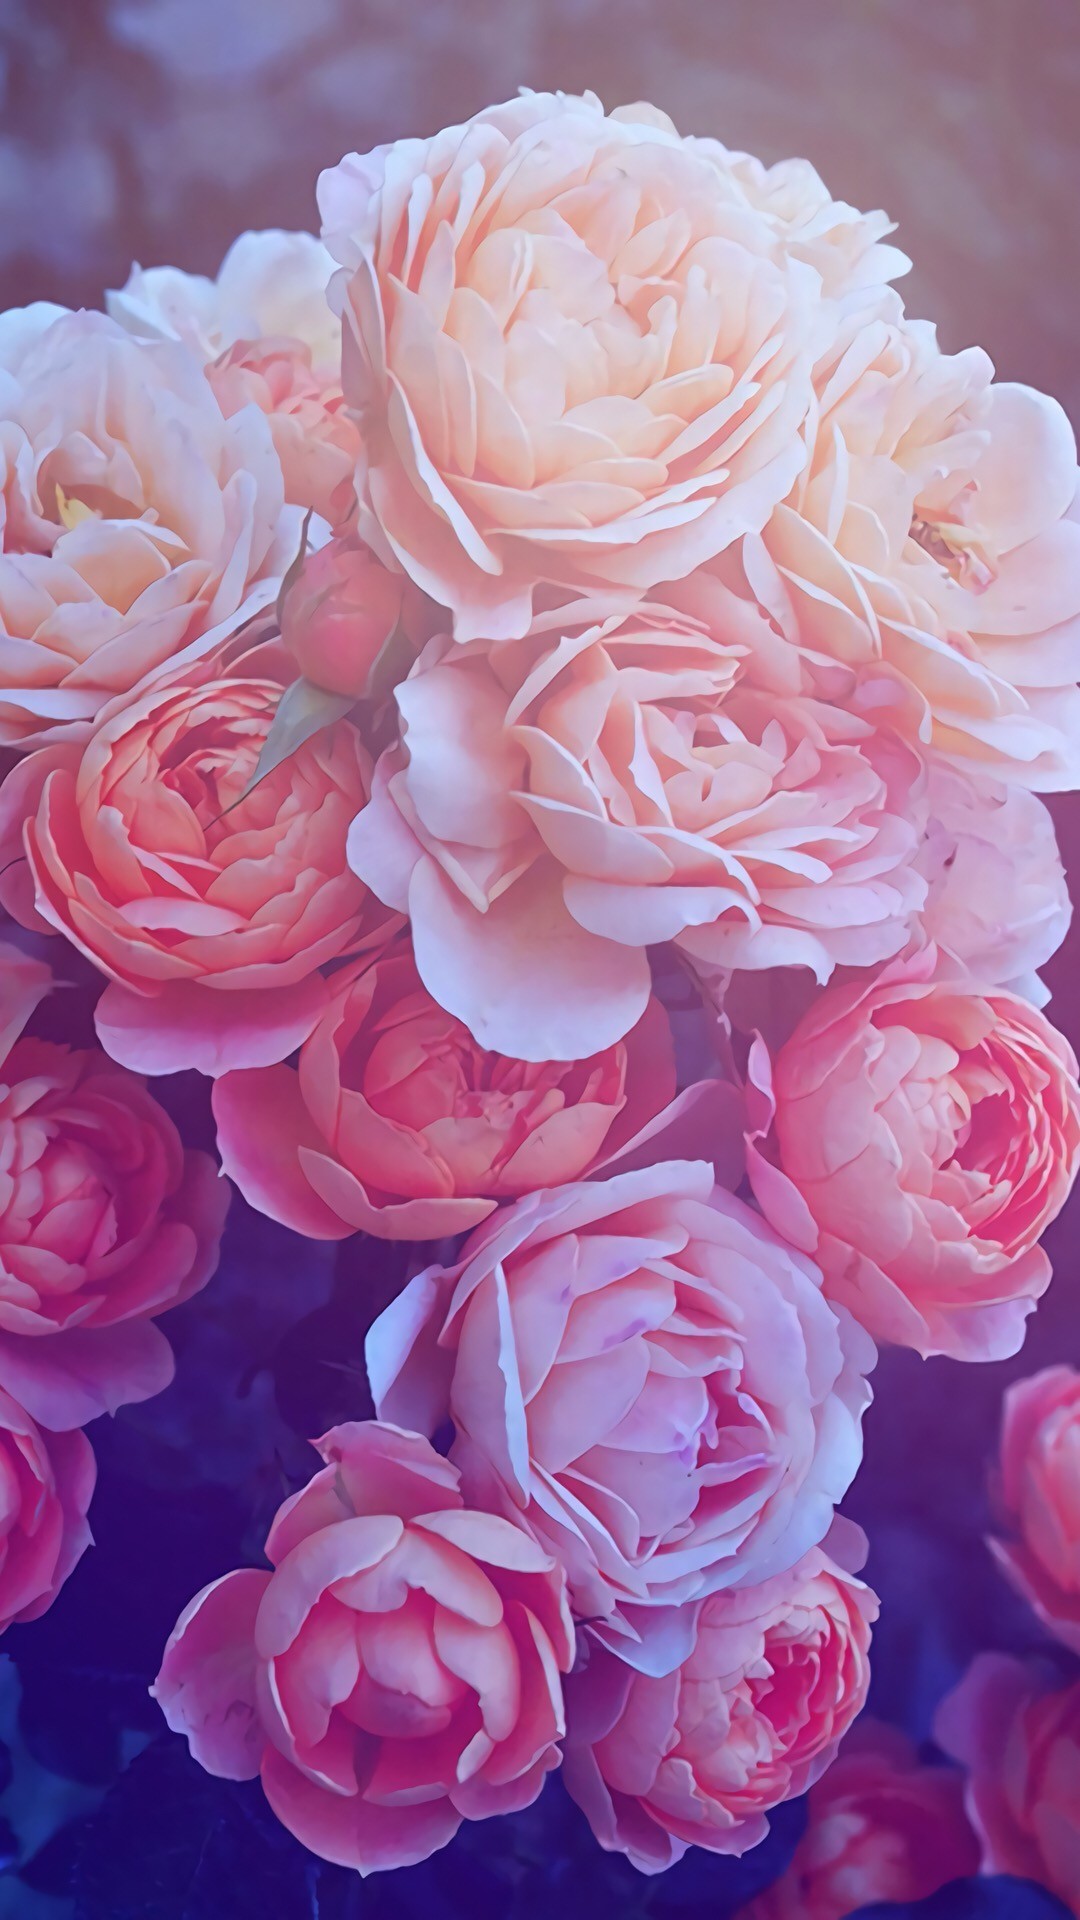 Rose Wallpaper for iPhone (87+ images)